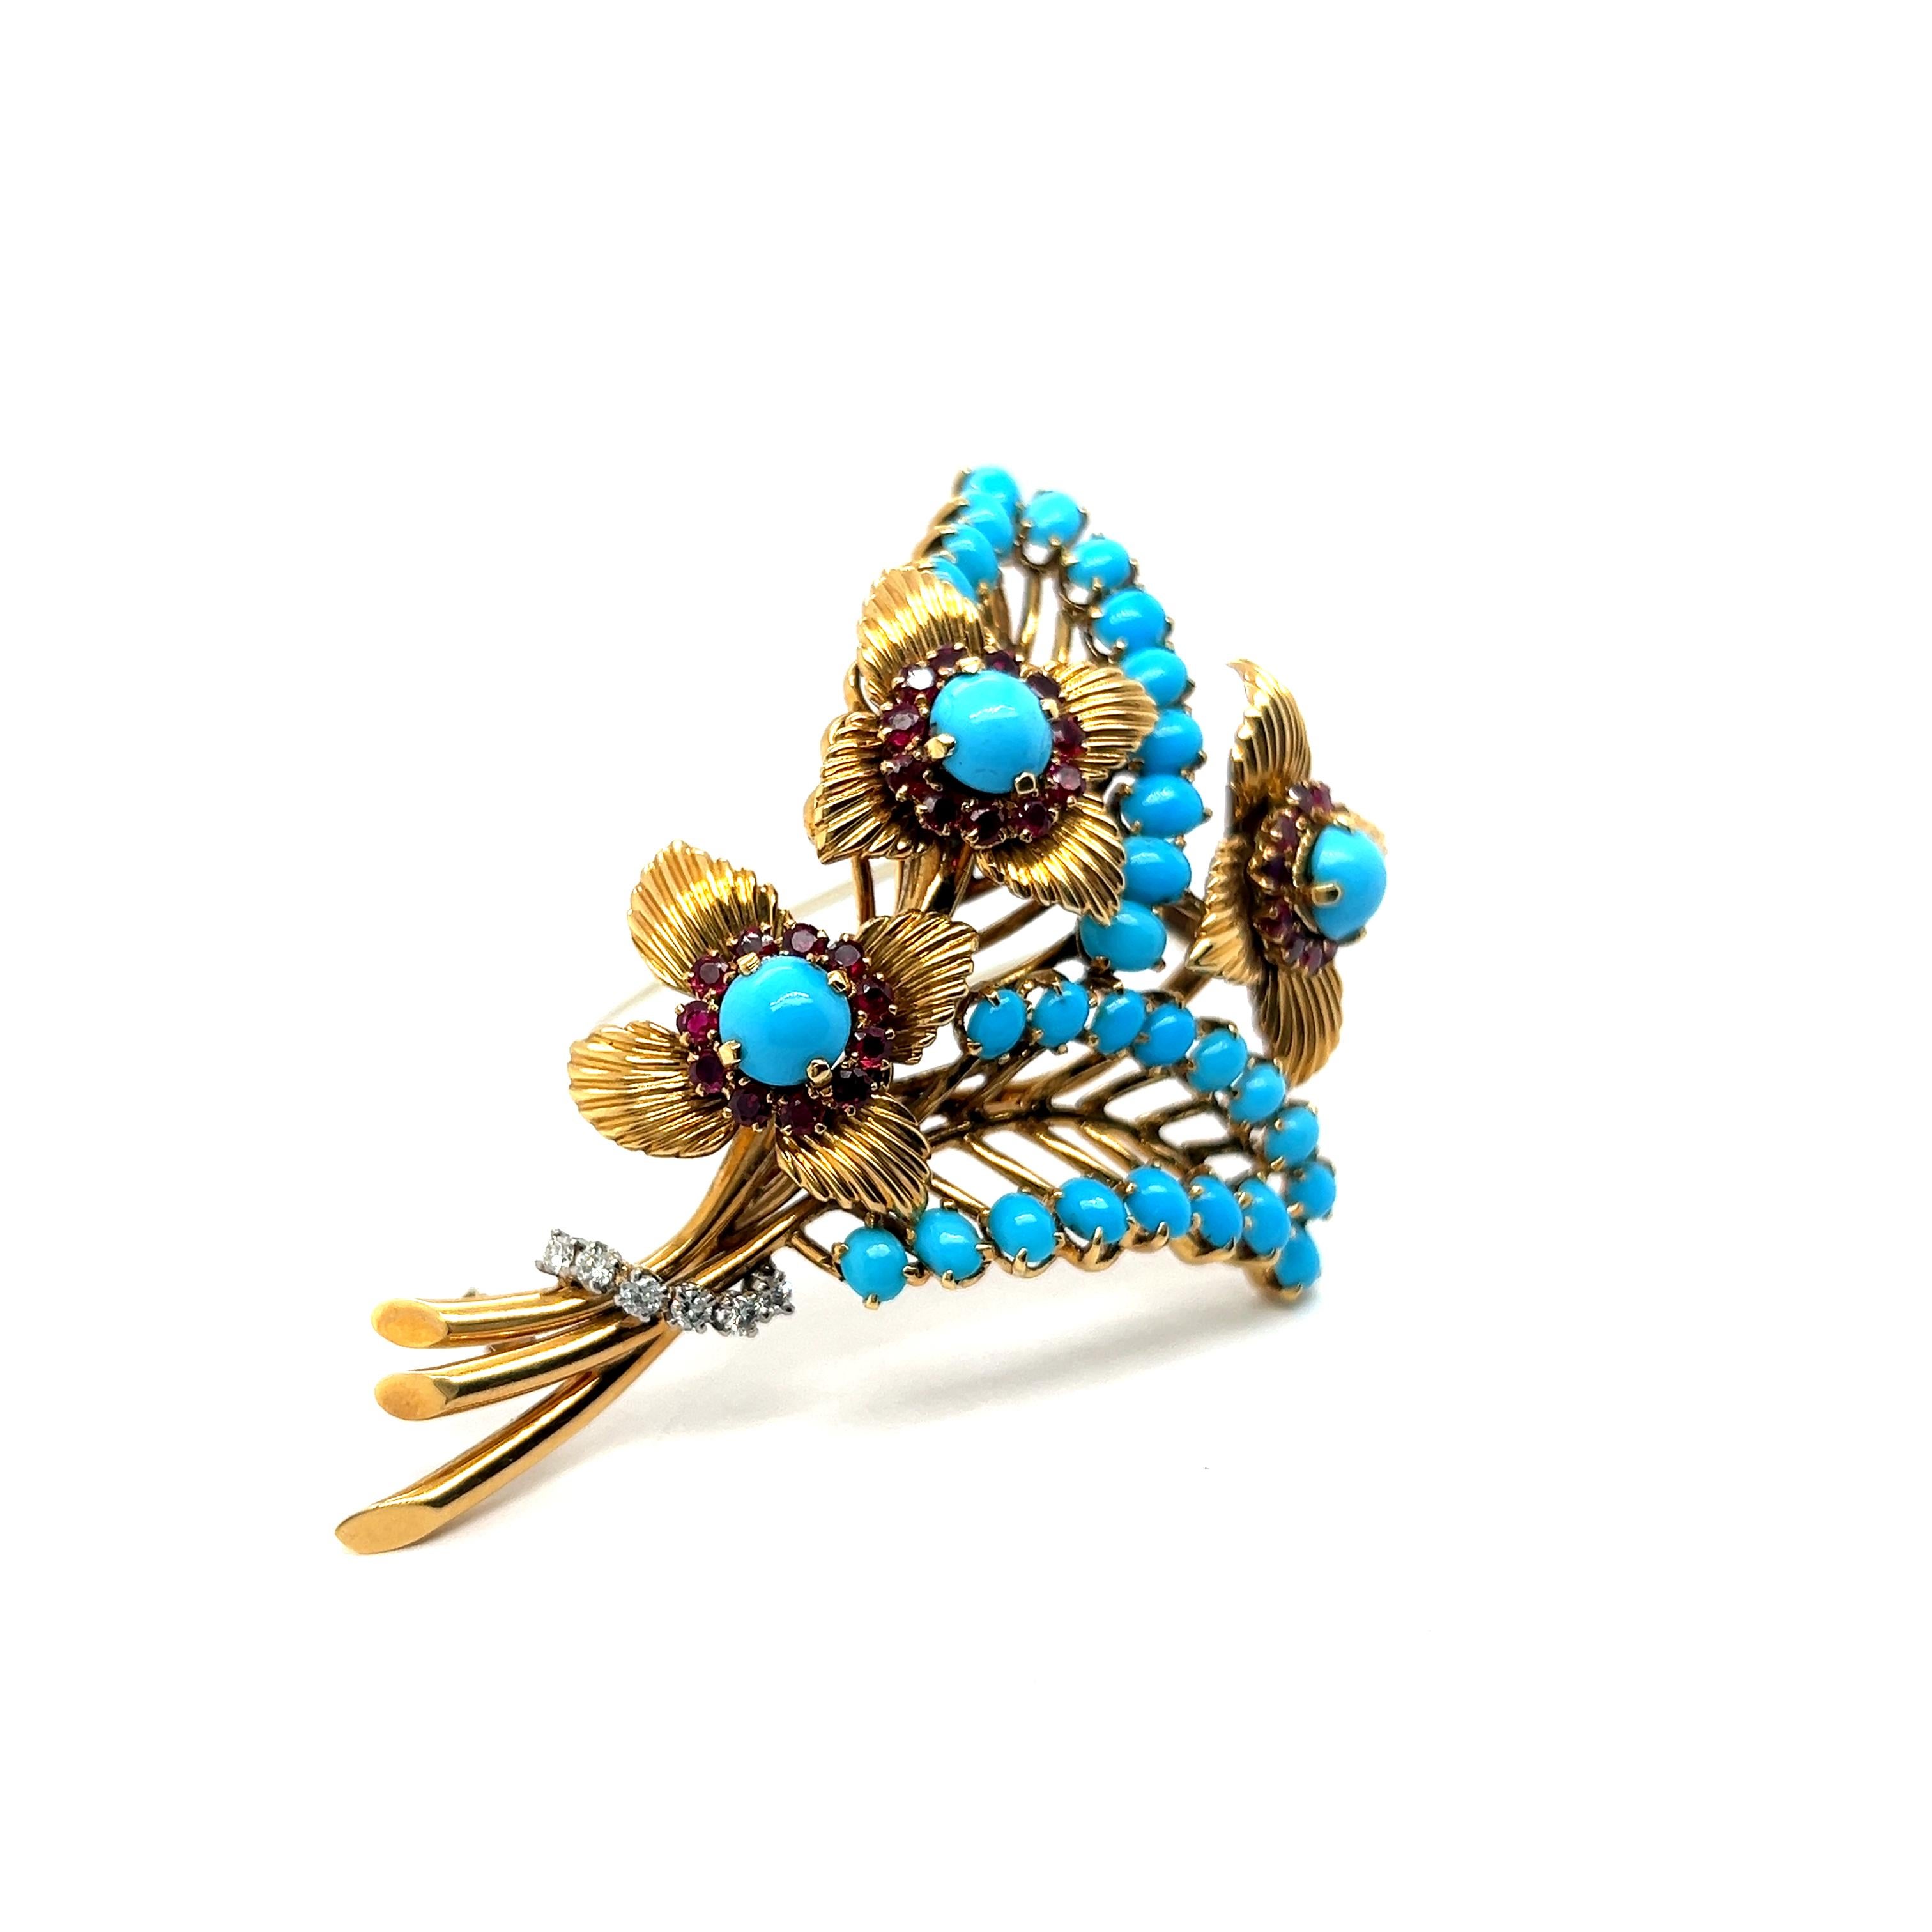 Brooch with Turquoise, Rubies & Diamonds in 18 Karat Yellow Gold by Gübelin For Sale 4